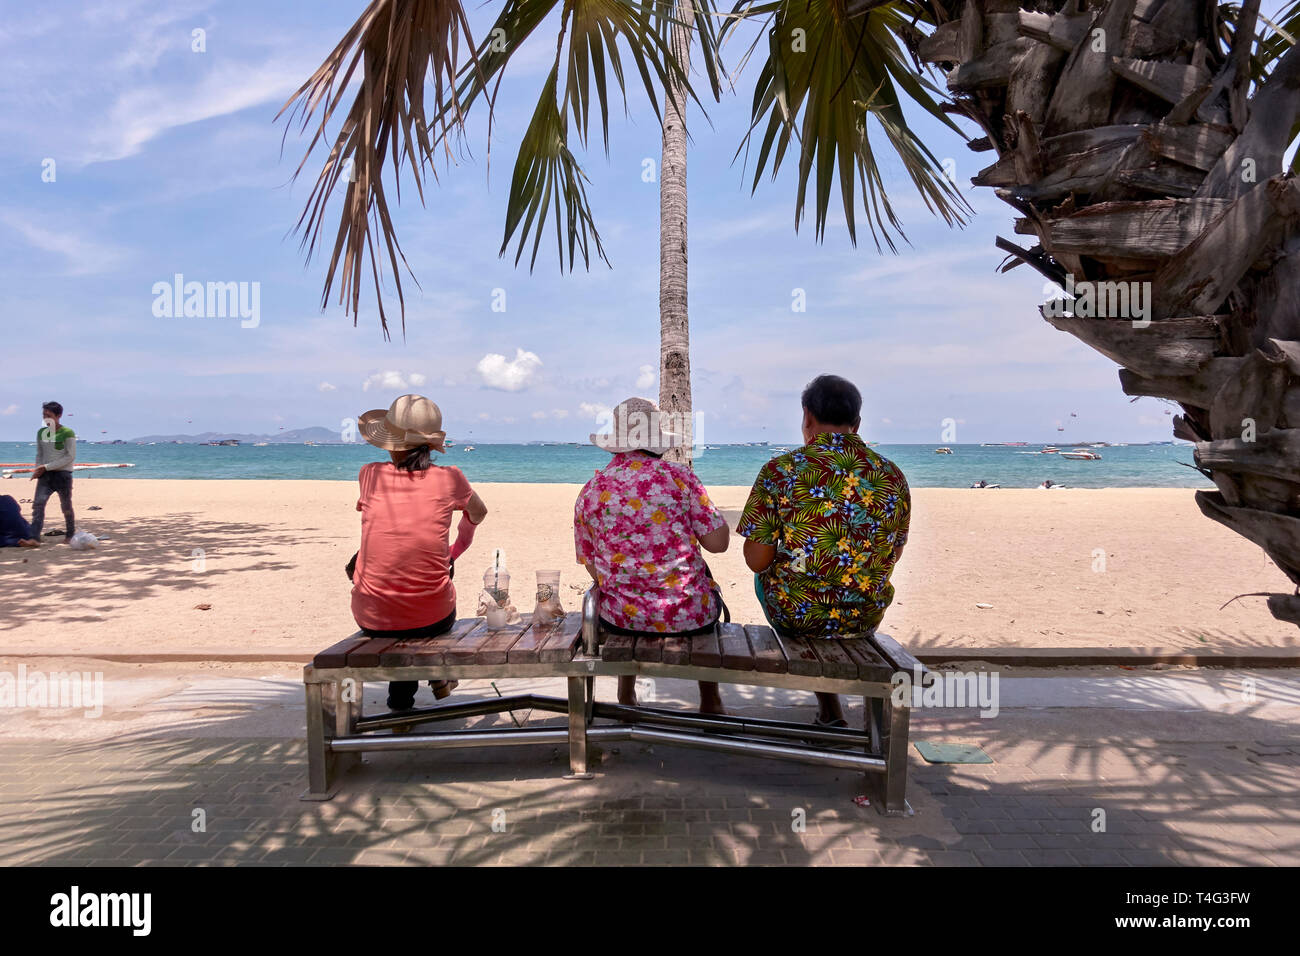 Three people. Man and two female companions sitting on a bench and overlooking the ocean at Pattaya beach, Thailand, Southeast Asia Stock Photo